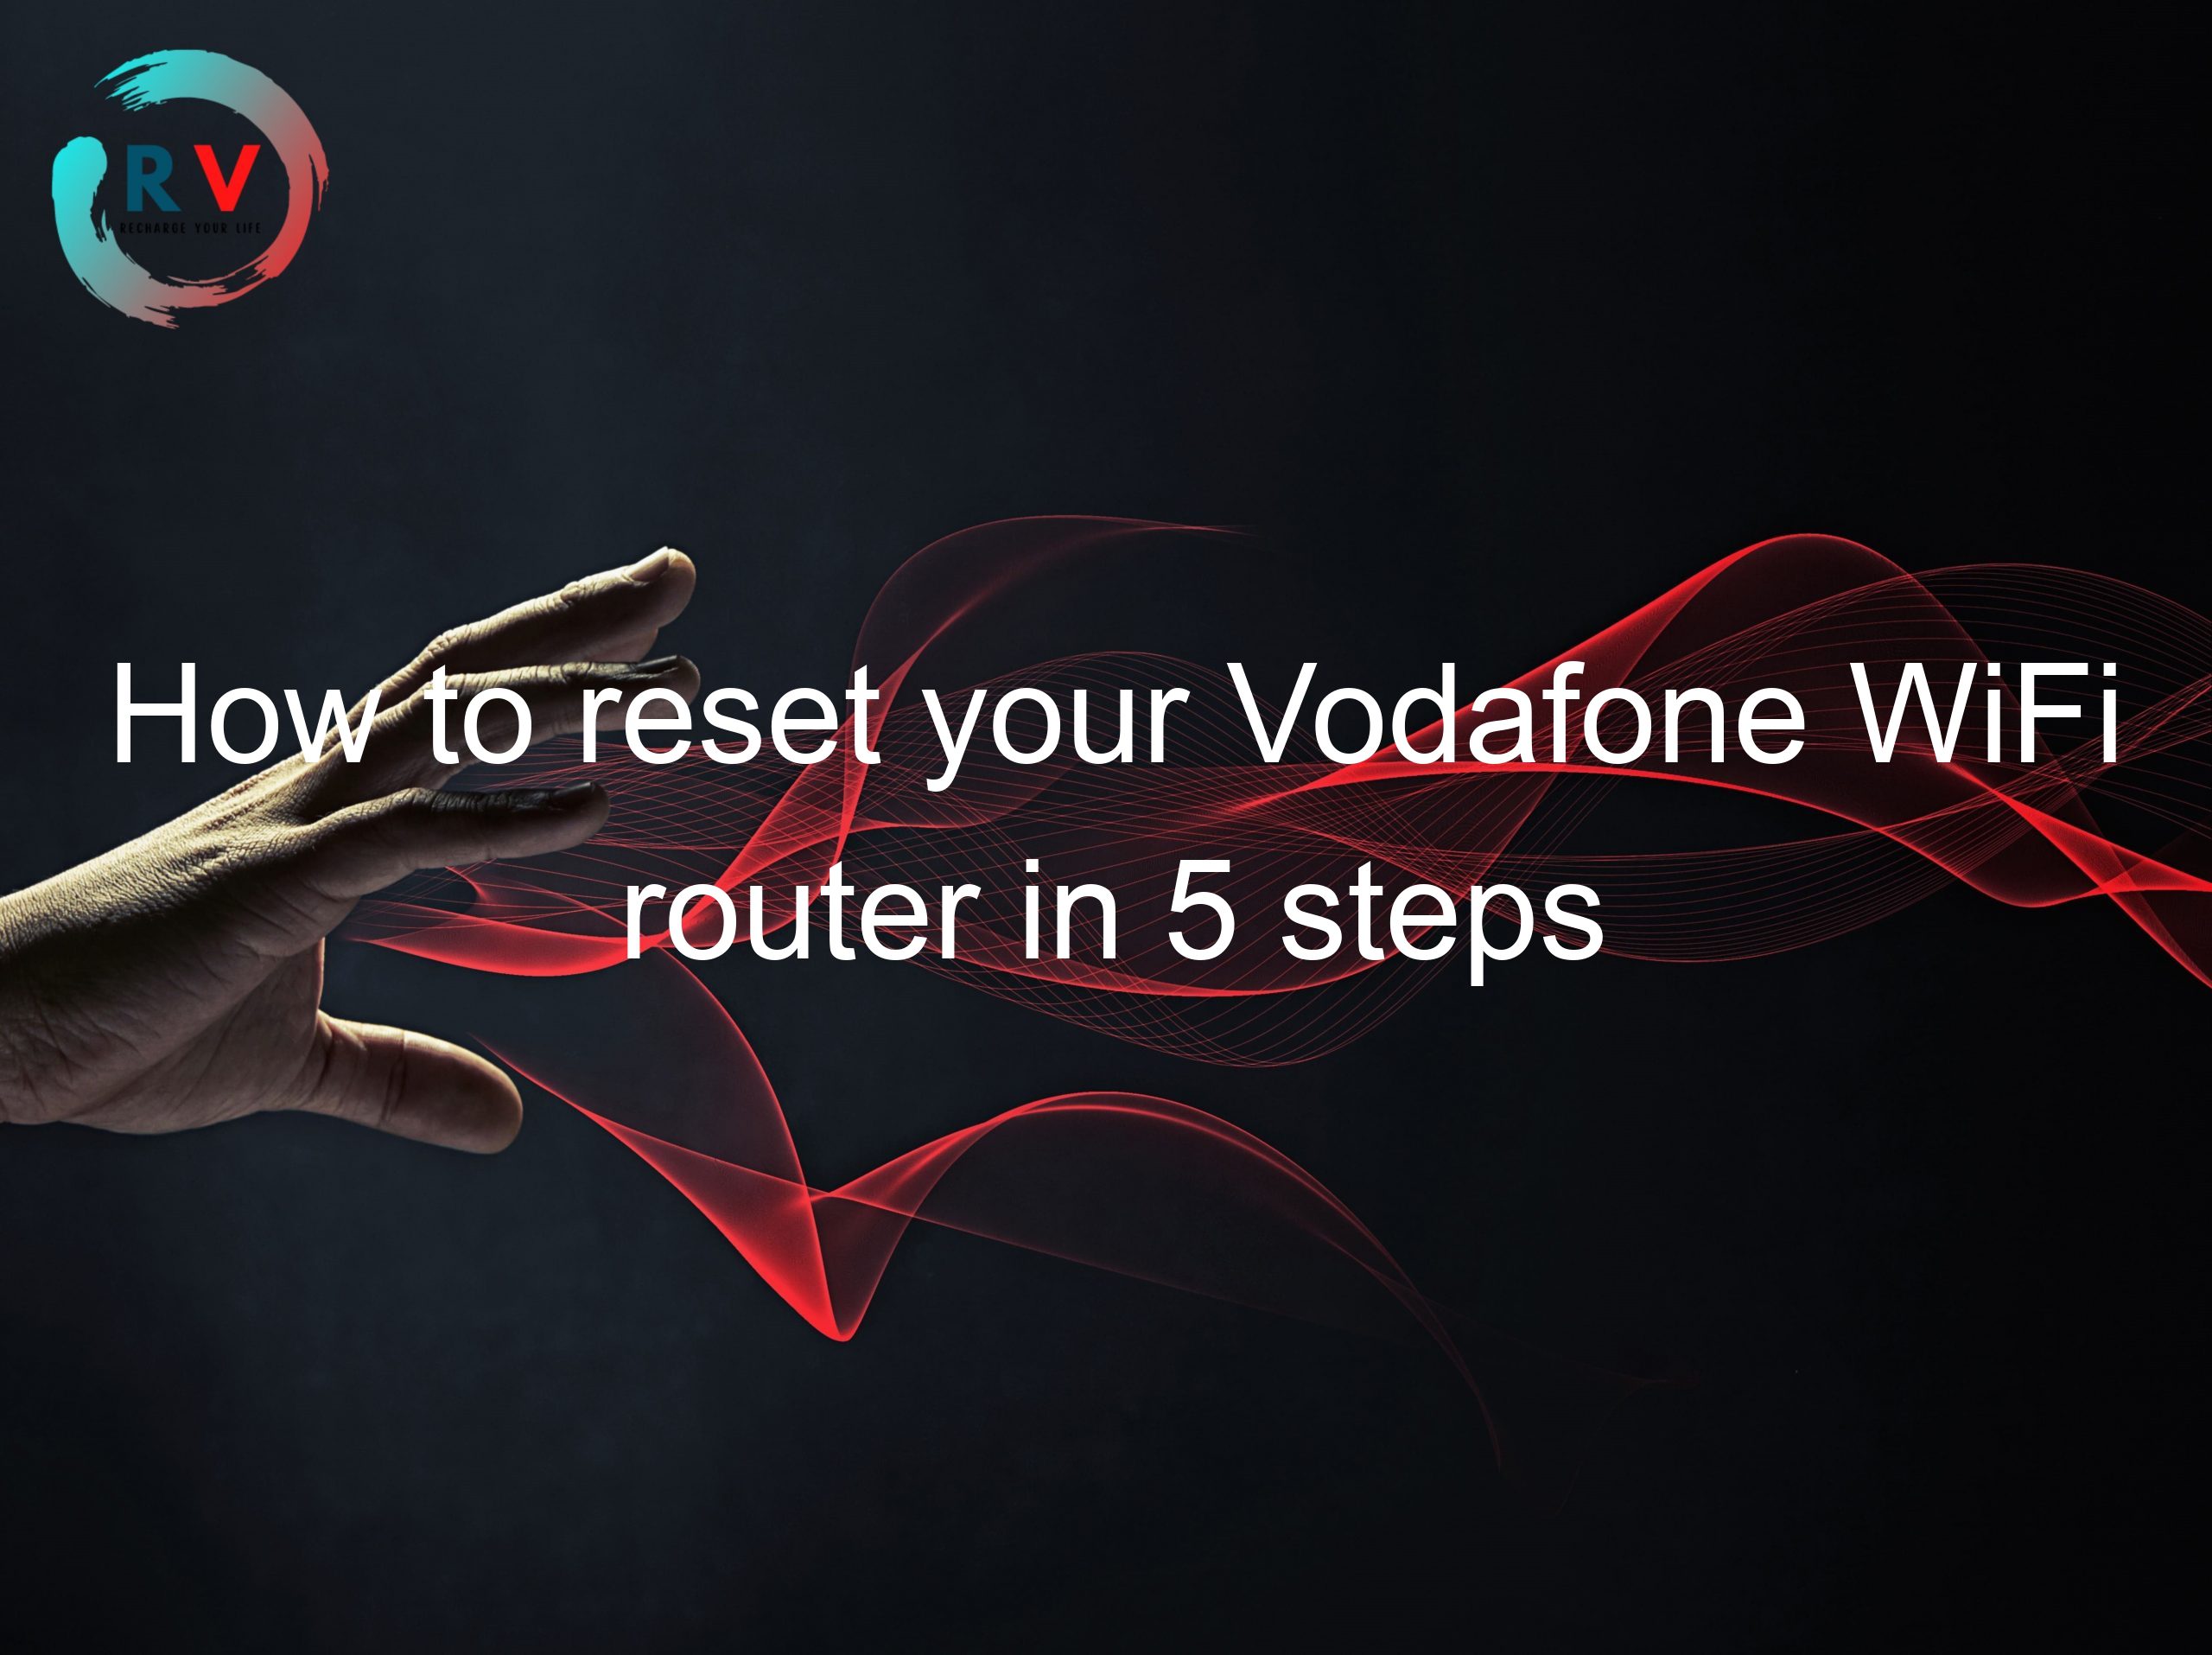 How to reset your Vodafone WiFi router in 5 steps